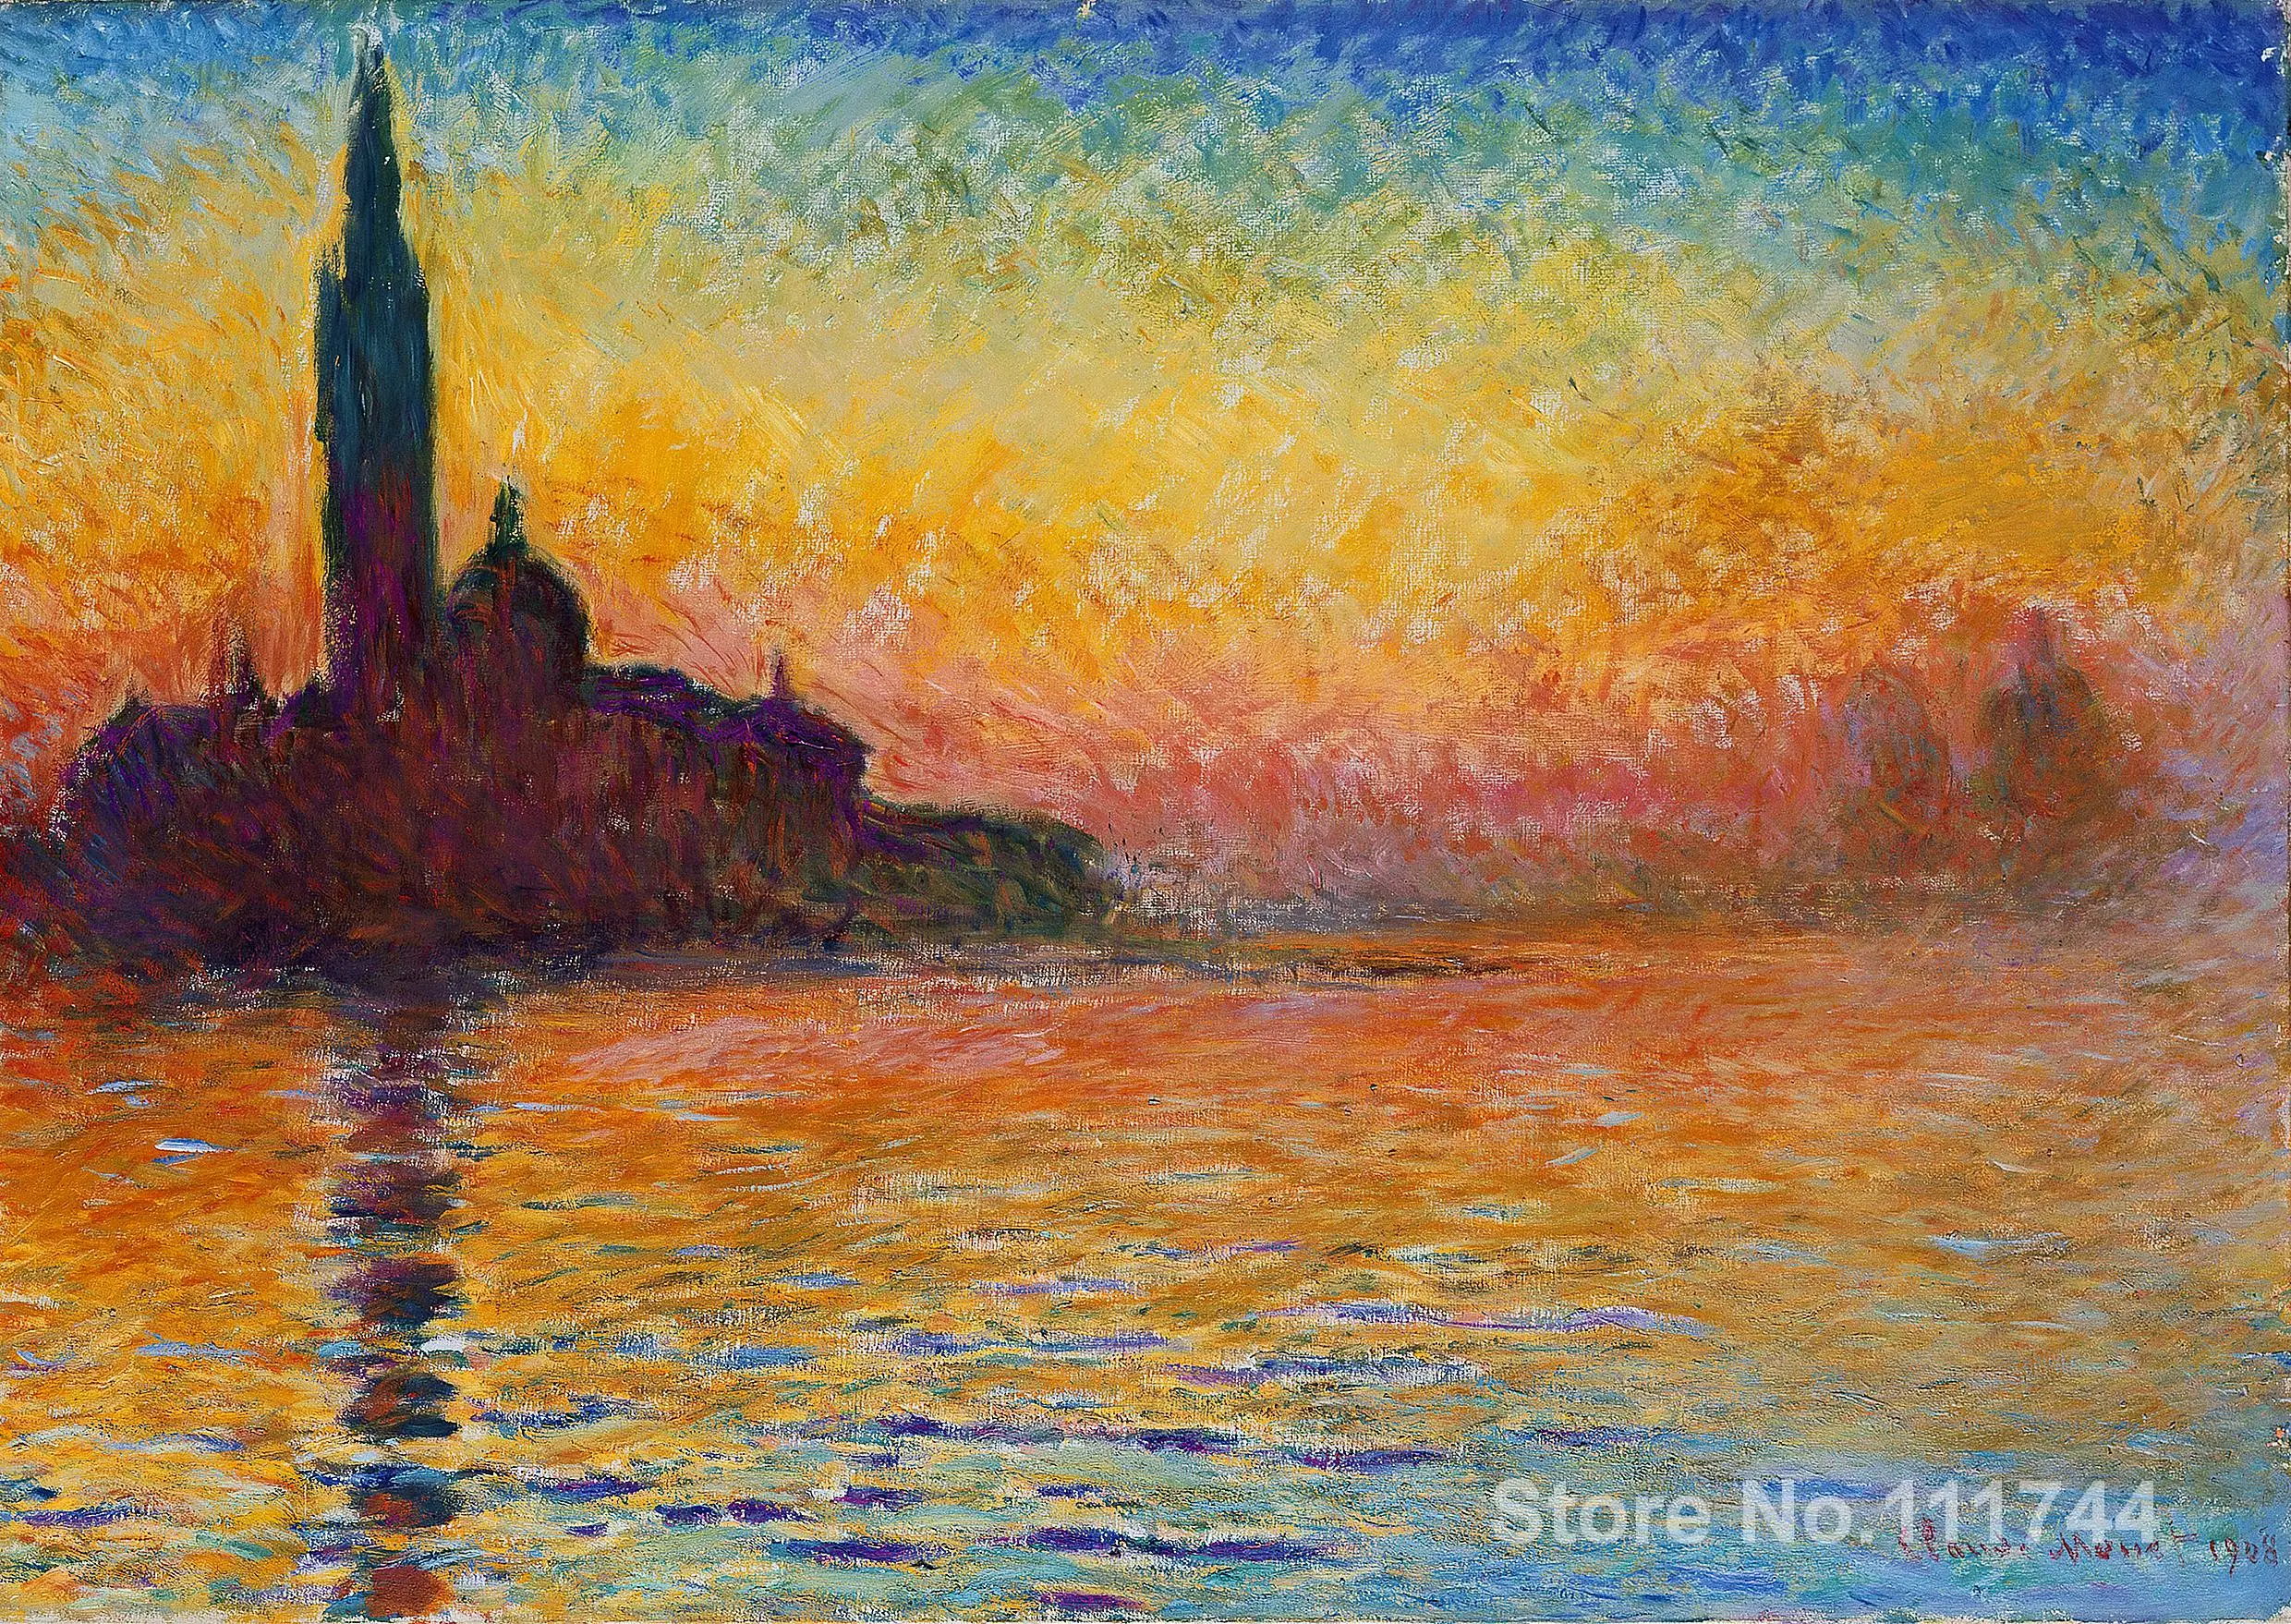 

Landscape paintings San Giorgio Maggiore at Dusk by Claude Monet canvas art High quality Hand painted